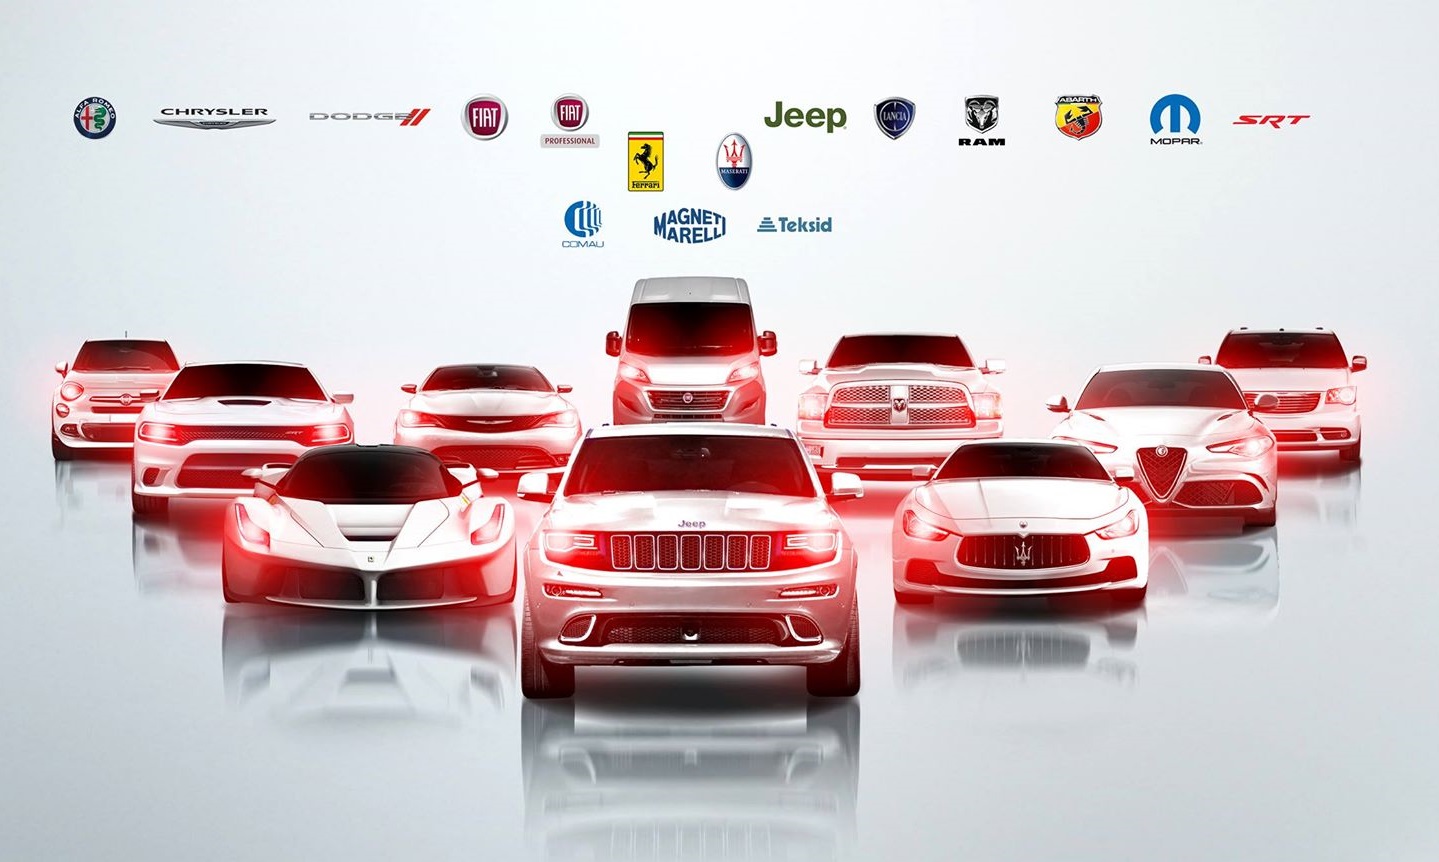 Fiat Chrysler Automobiles: 2019 Year in Review